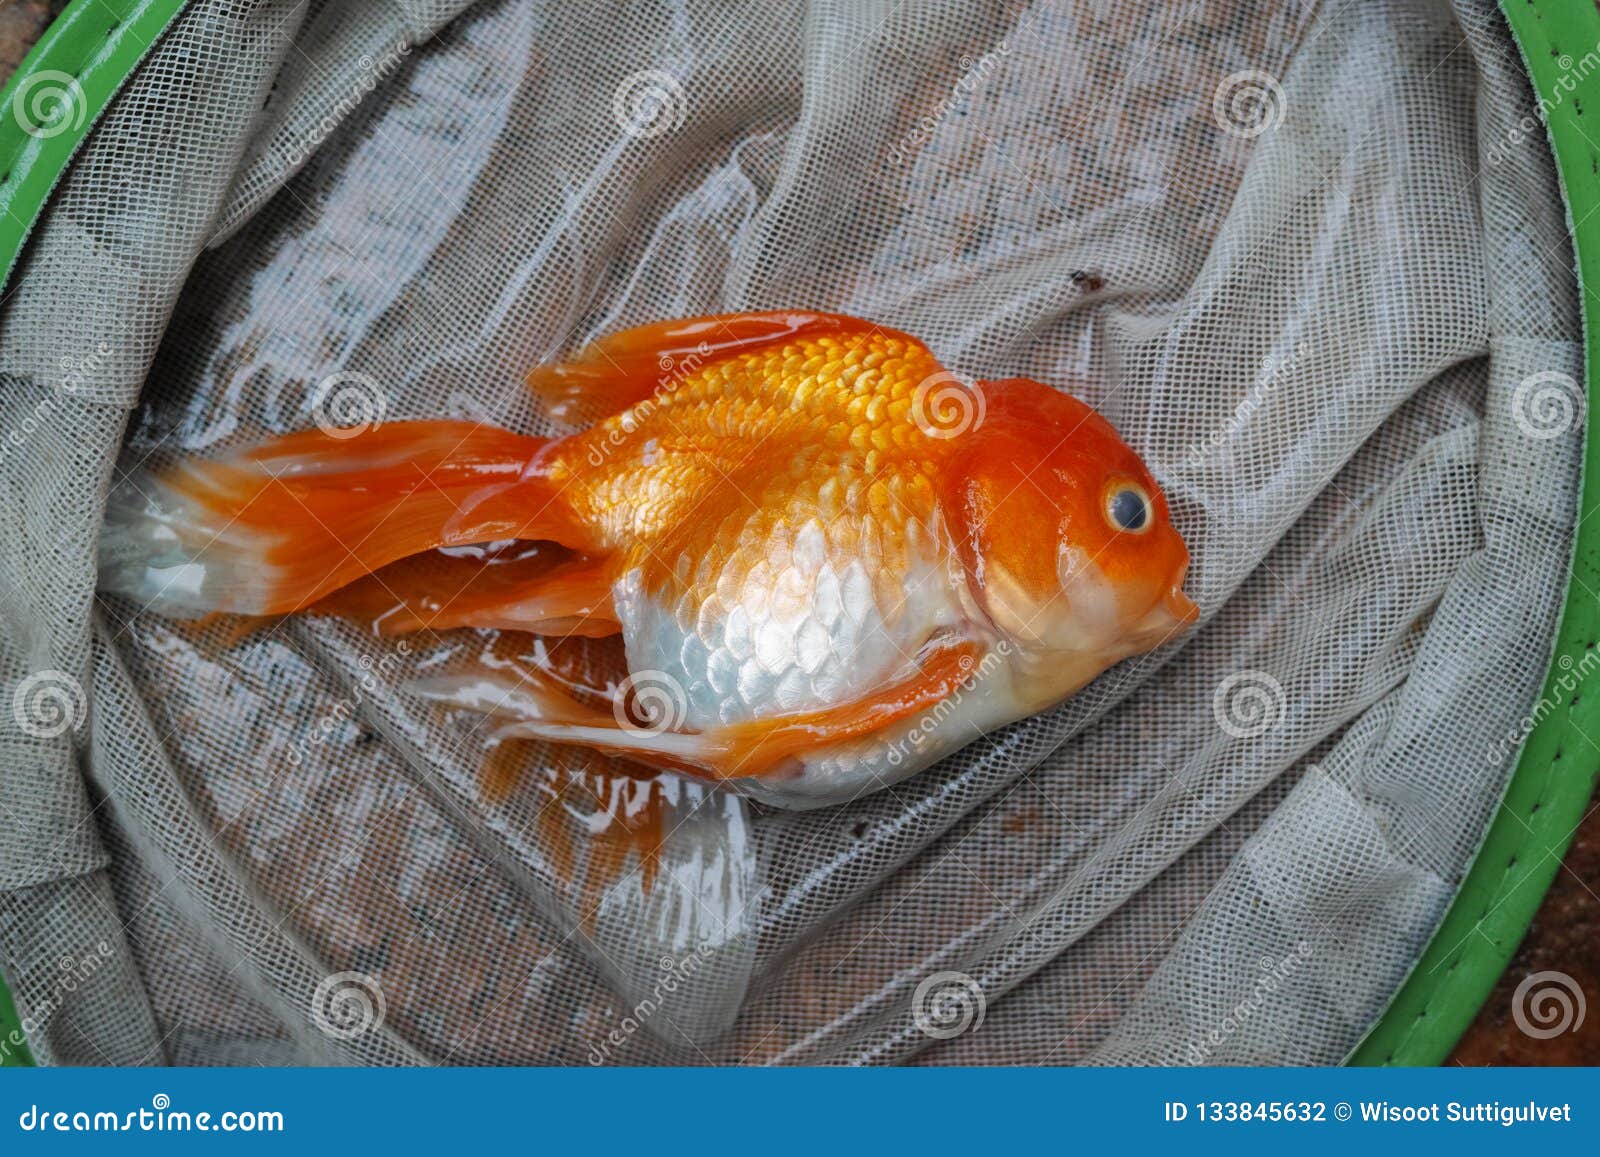 Dead Koi Fish Diseases Infected Stock Photo Image Of Animal